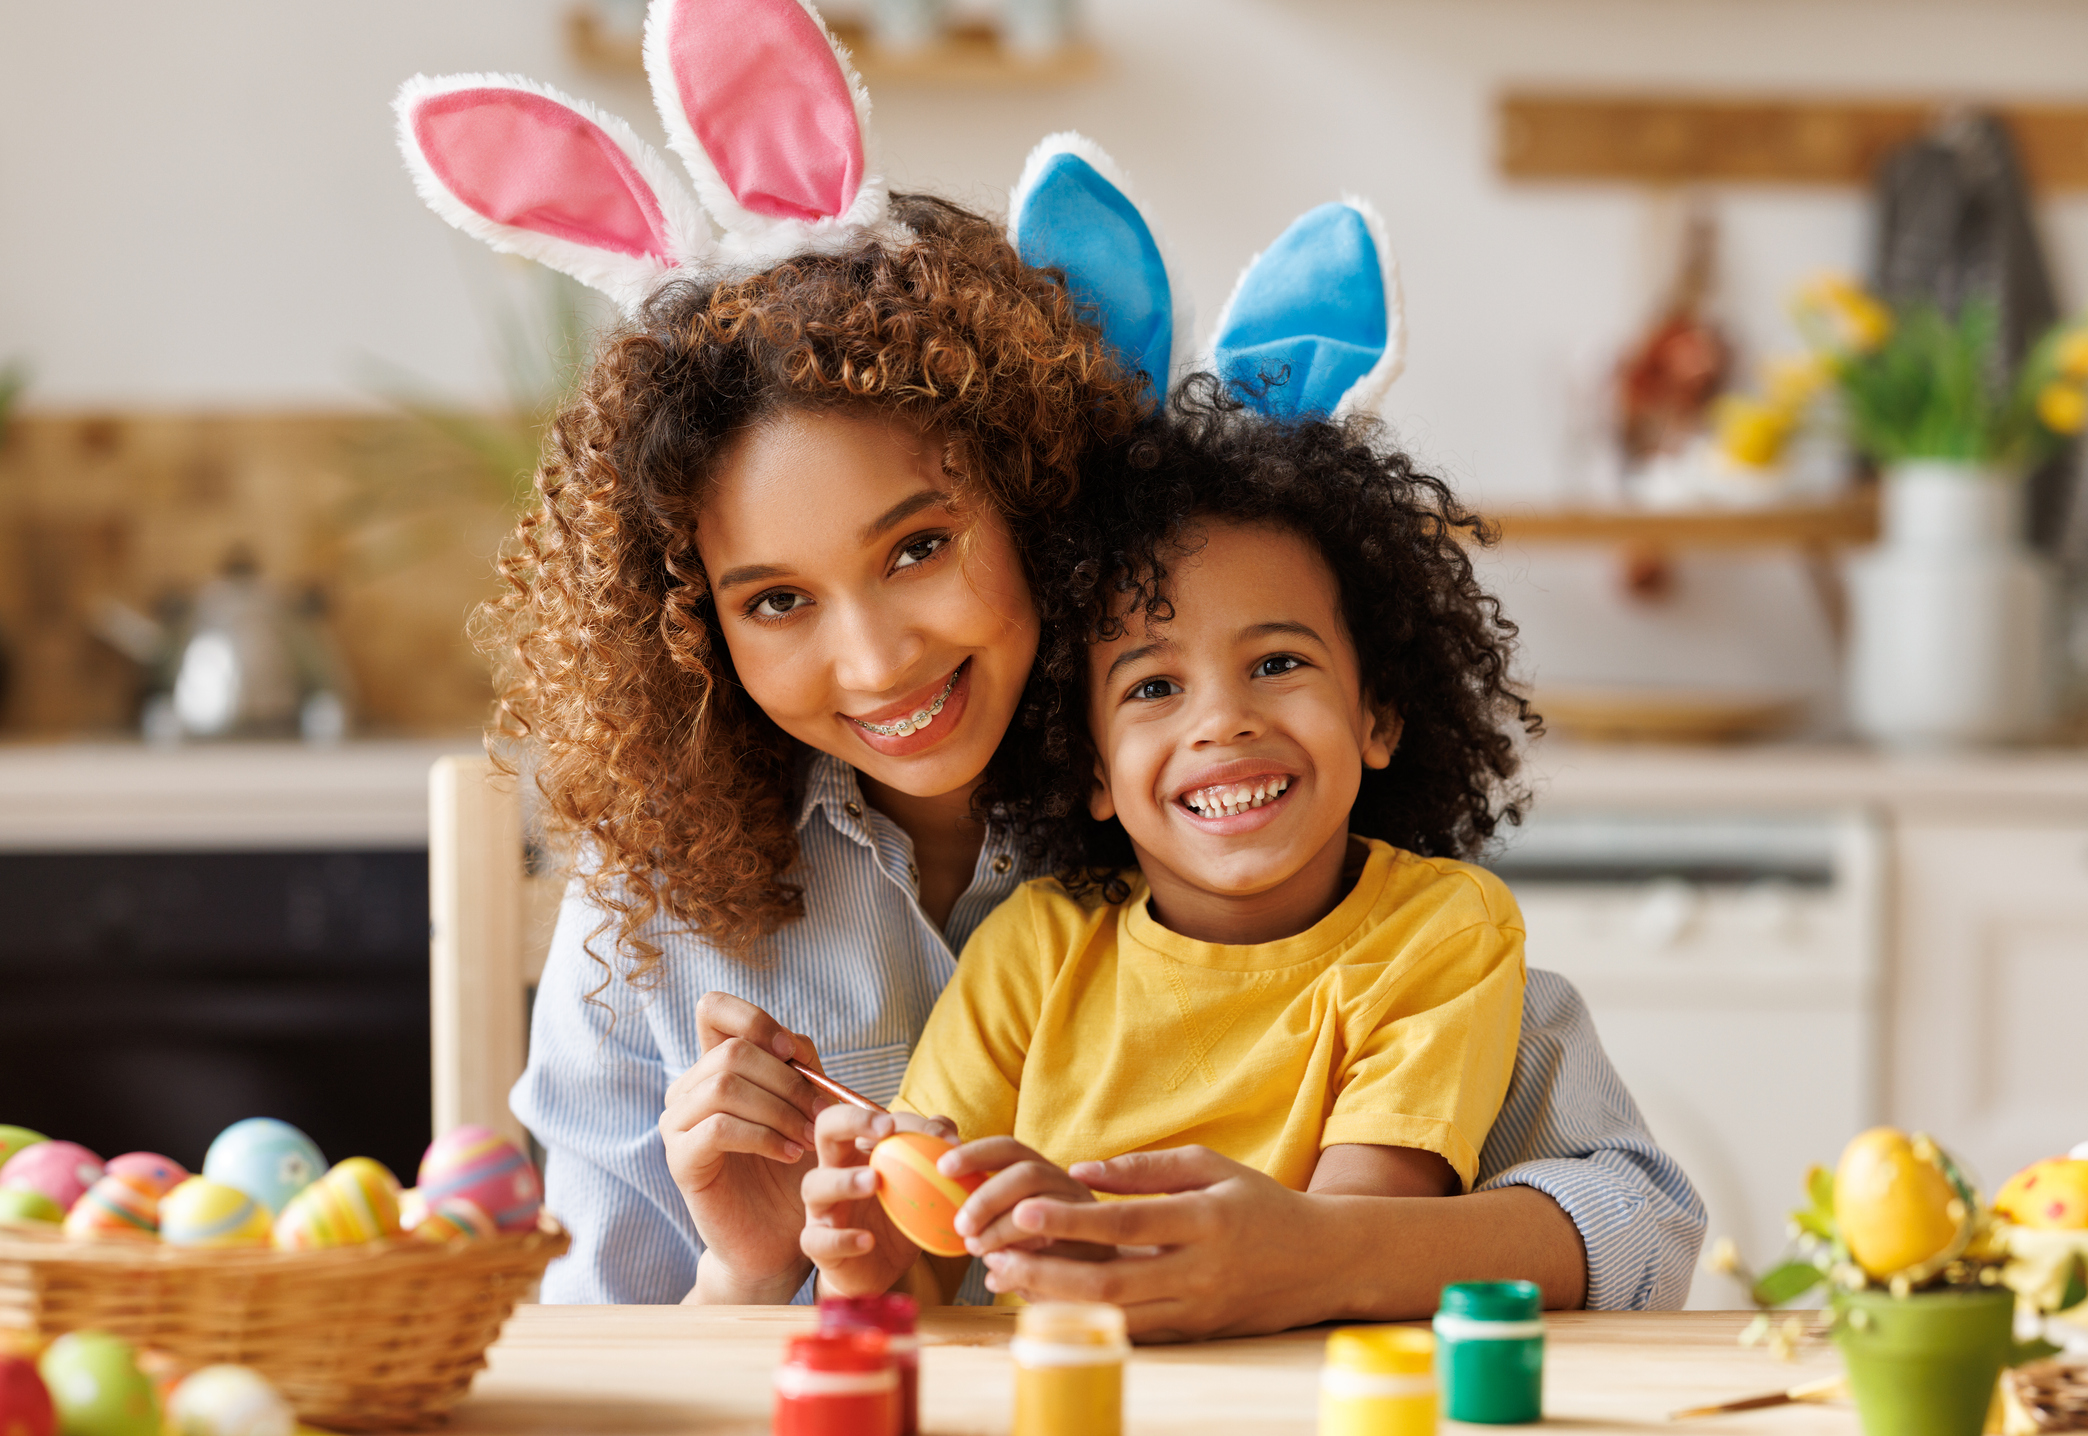 Get Ready for Easter in Fort Worth by Shopping at Hulen Square